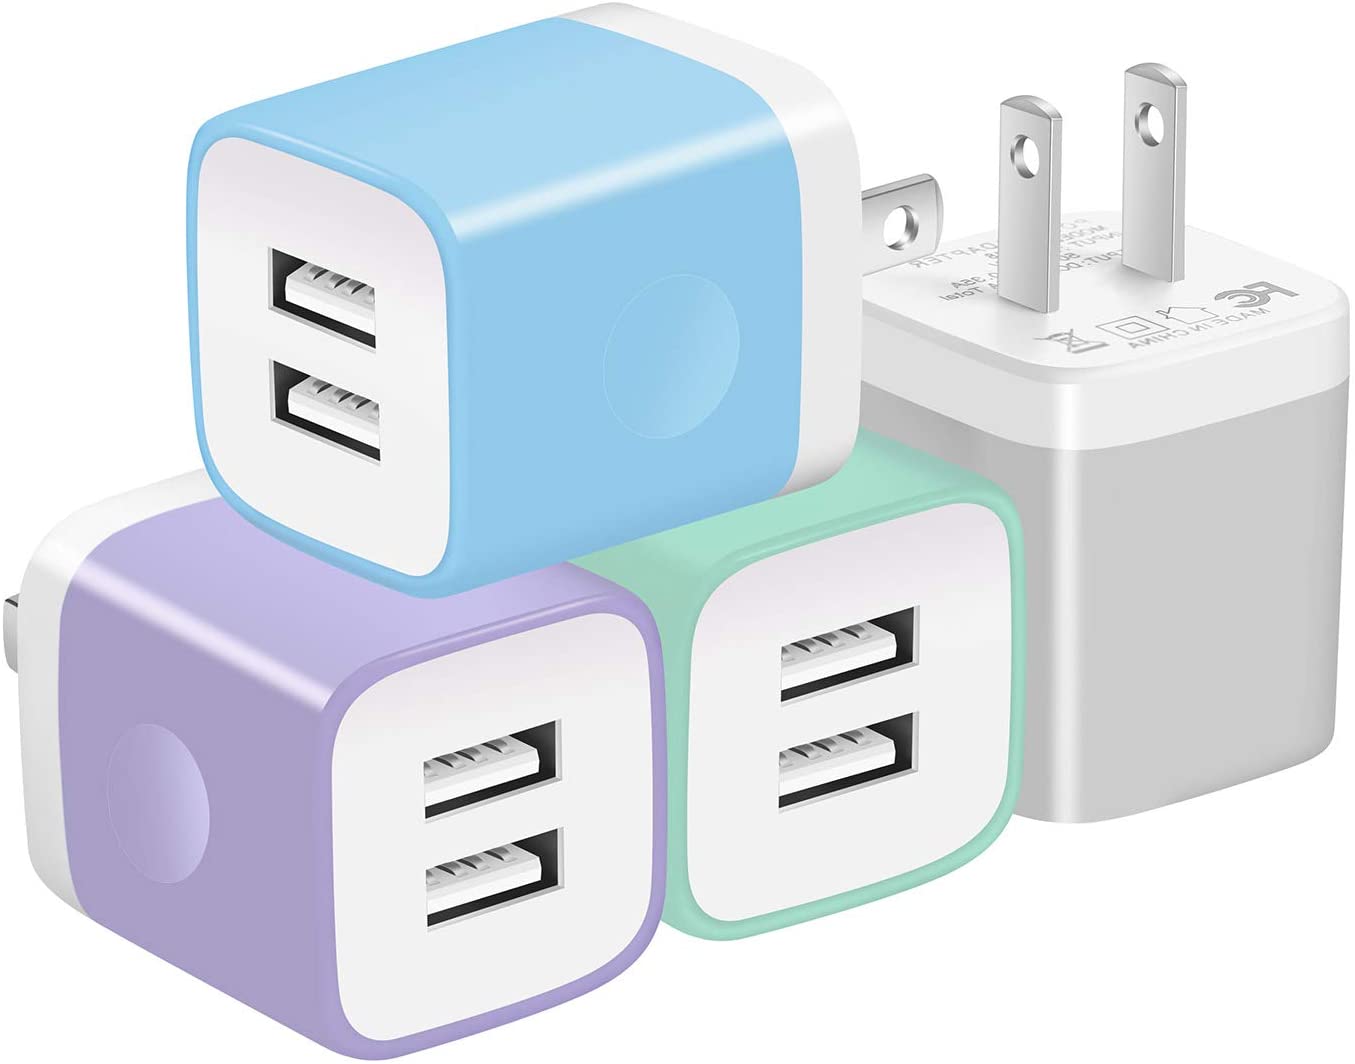 X-EDITION USB Wall Charger, 4-Pack 2.1A Dual Port USB Wall Plug Power Adapter Charging Block Charger Box Cube Compatible with iPhone 13 12 11 Pro Max Mini XS XR X 8 7 6 Plus, Pad, Samsung, LG, Android